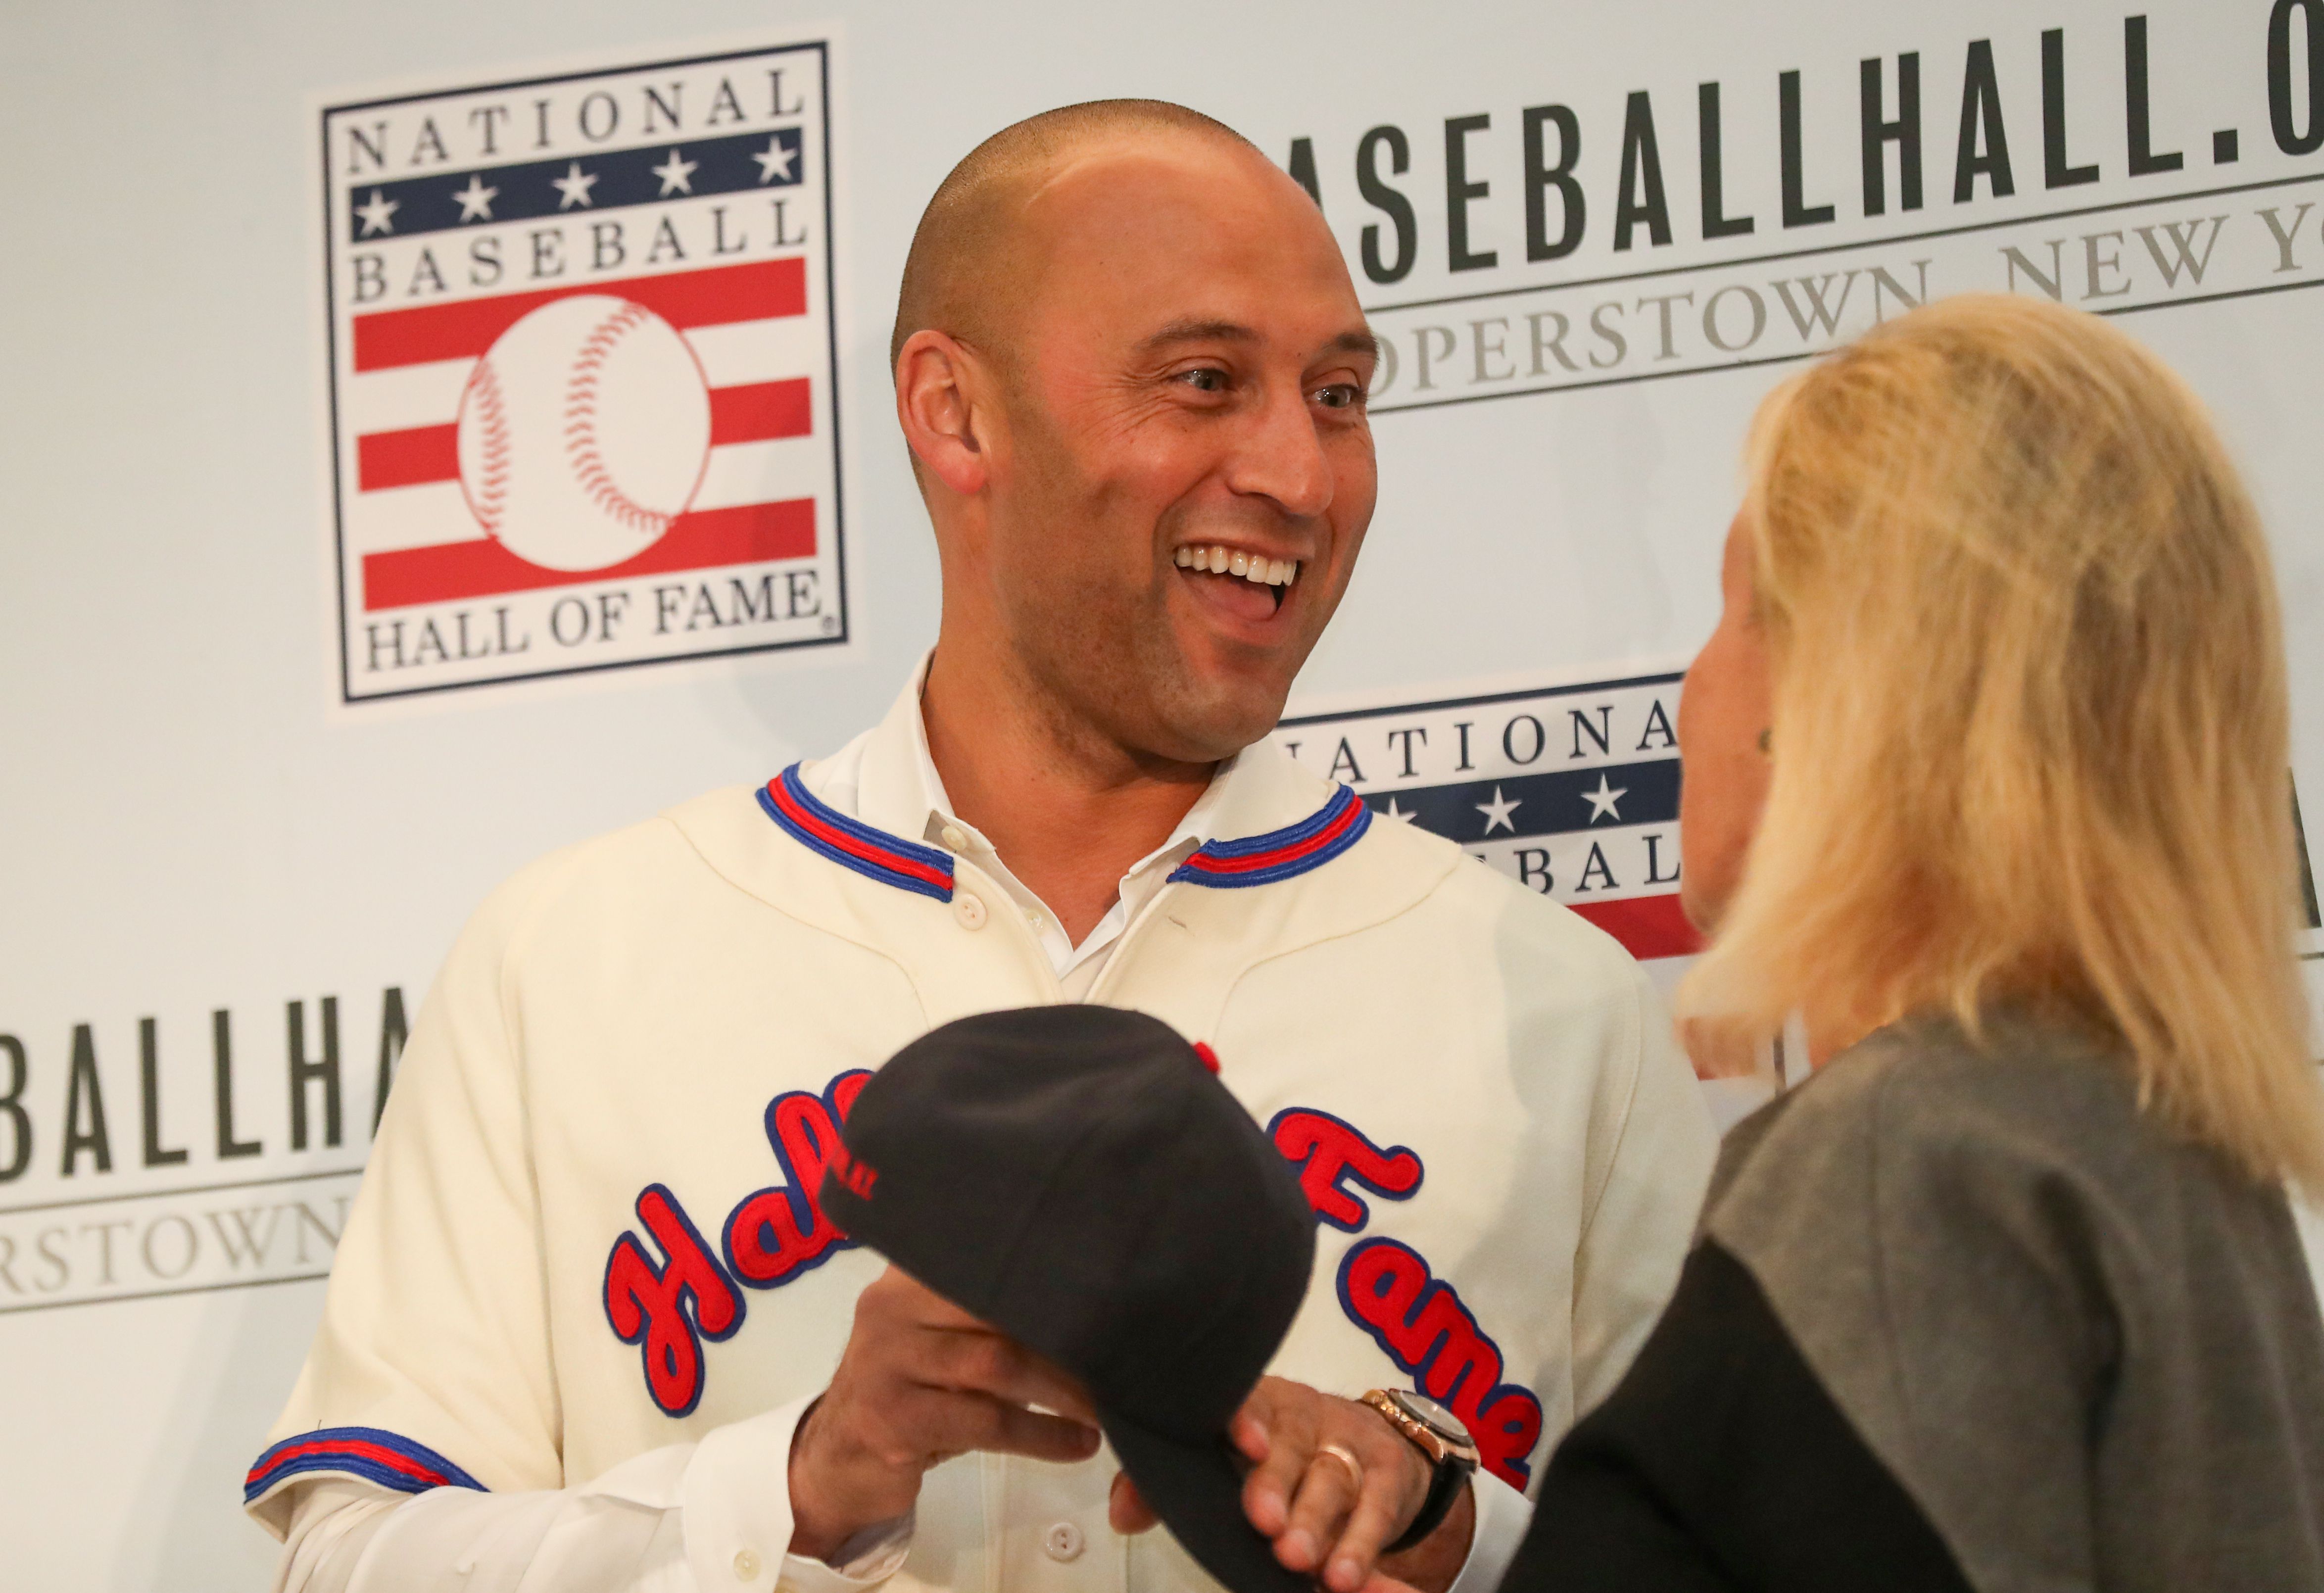 Celebrate Derek Jeter's Hall of Fame election with a BreakingT shirt -  Pinstripe Alley